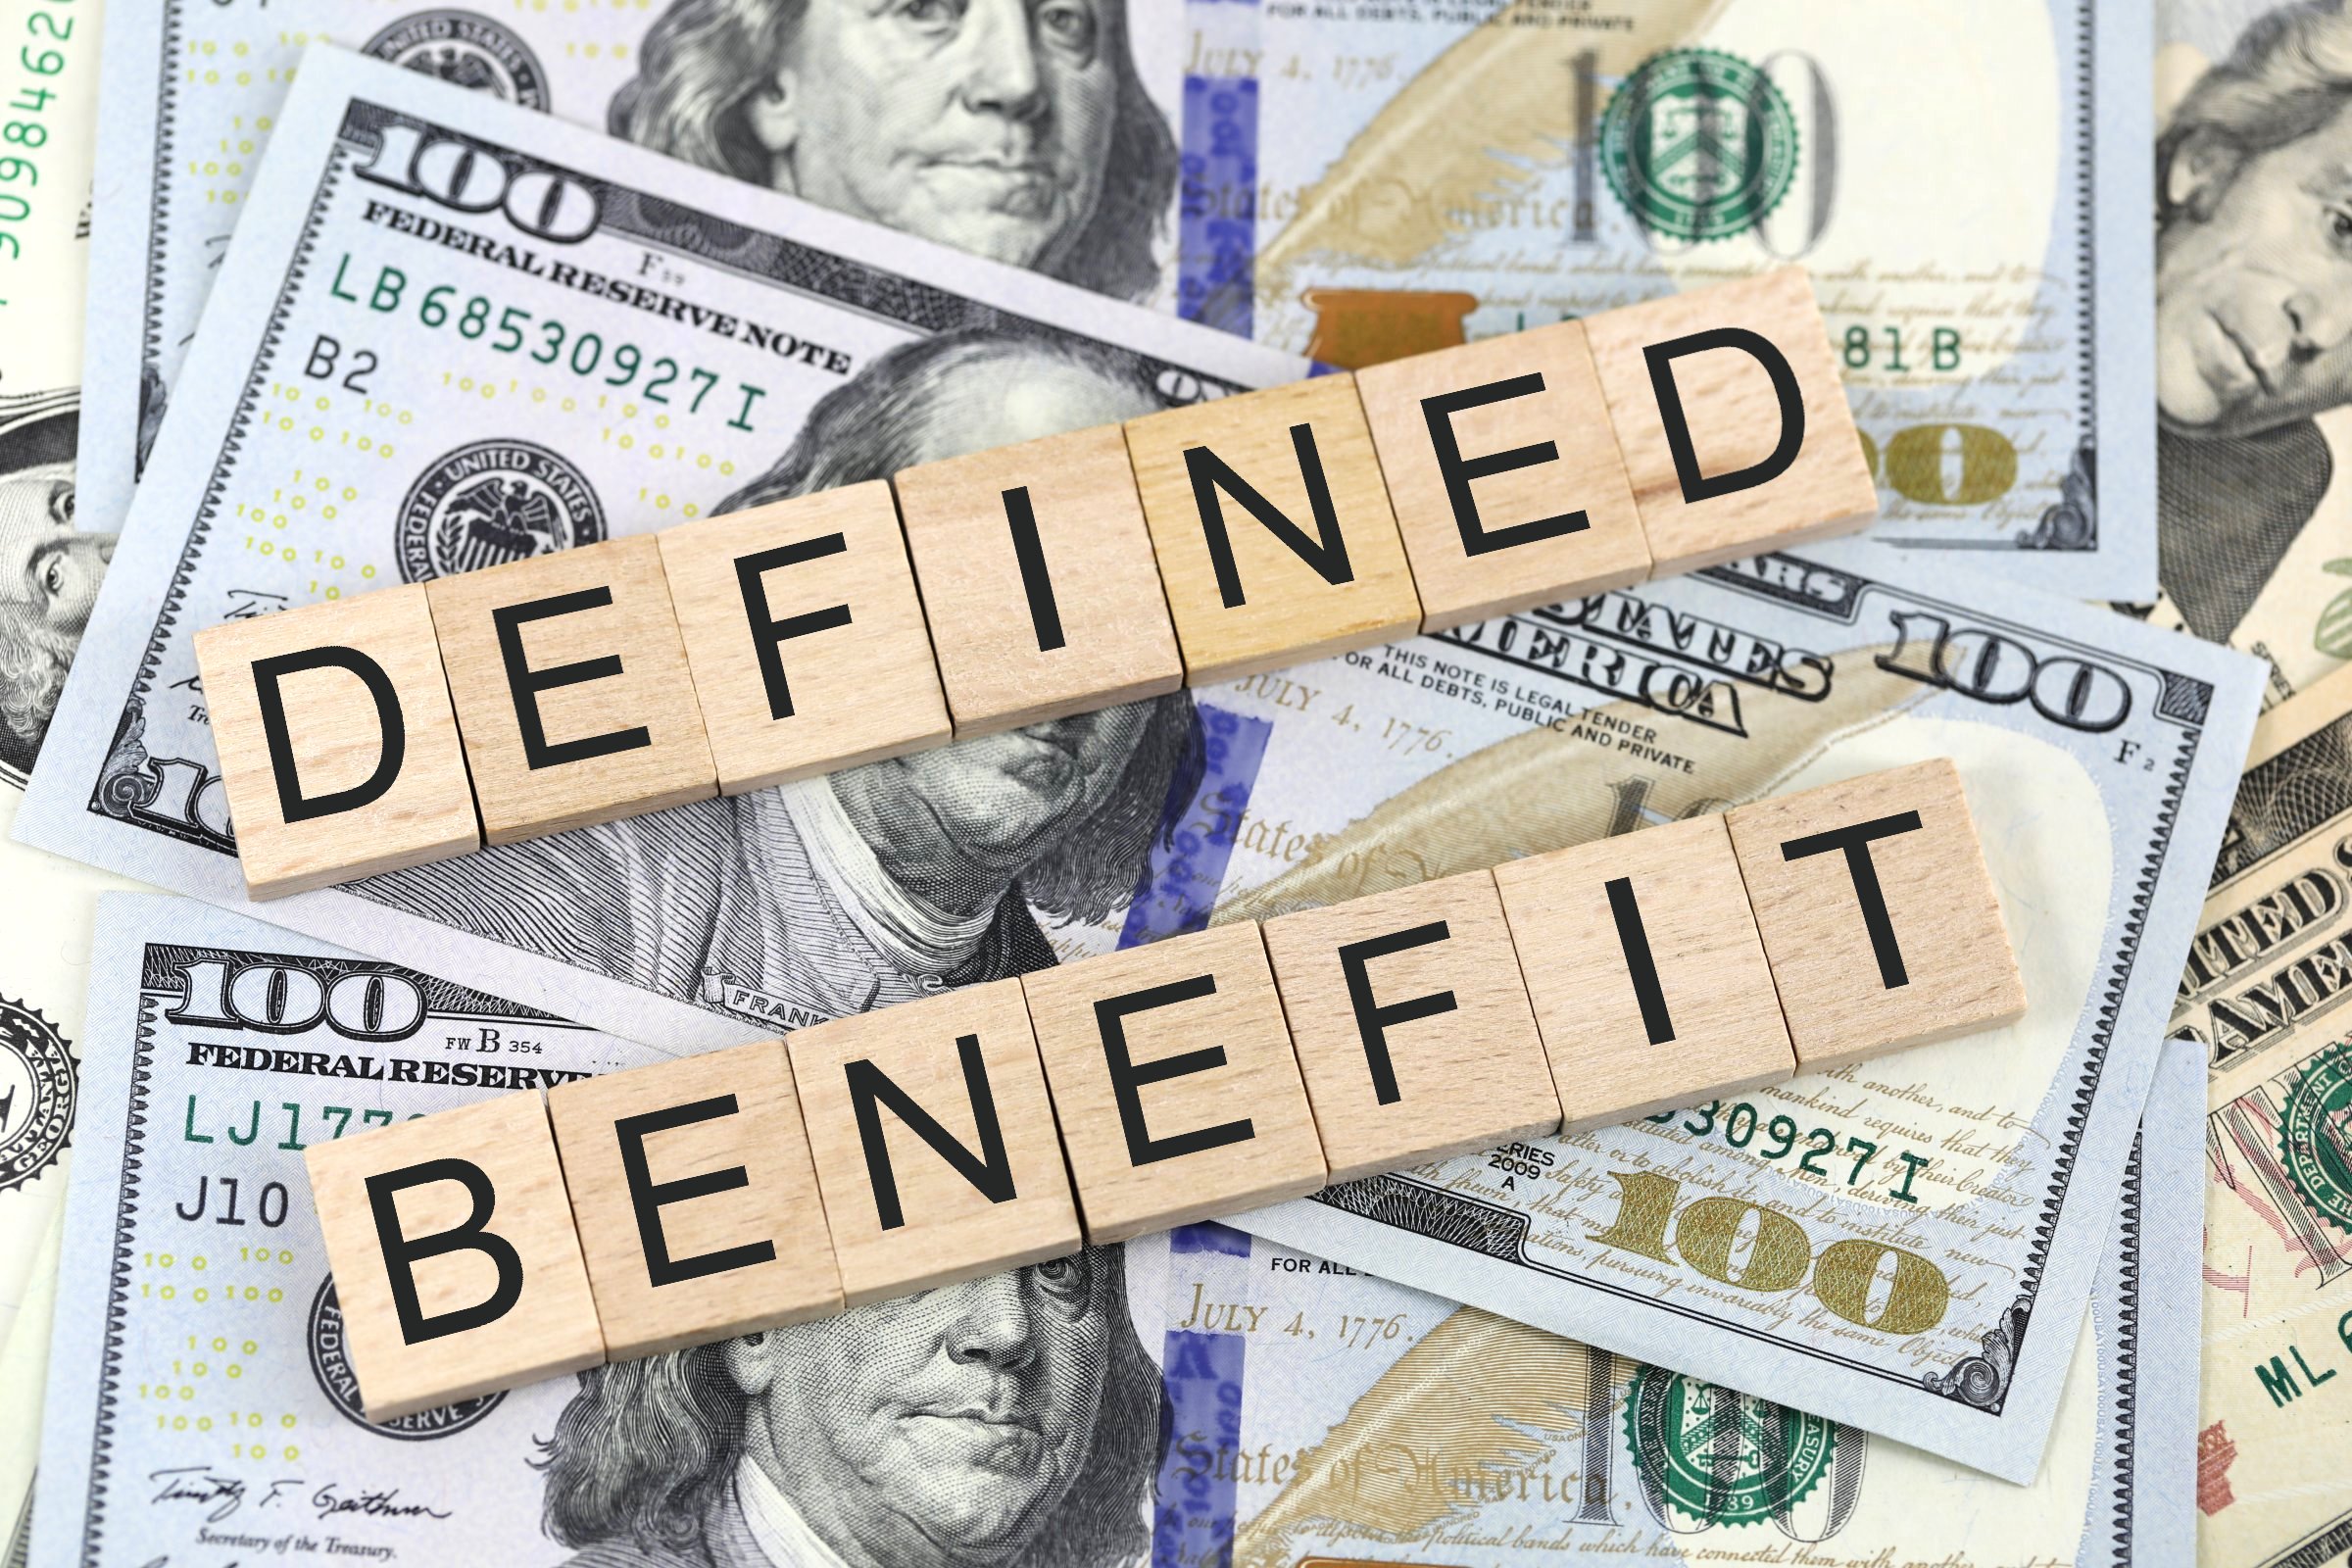 defined benefit